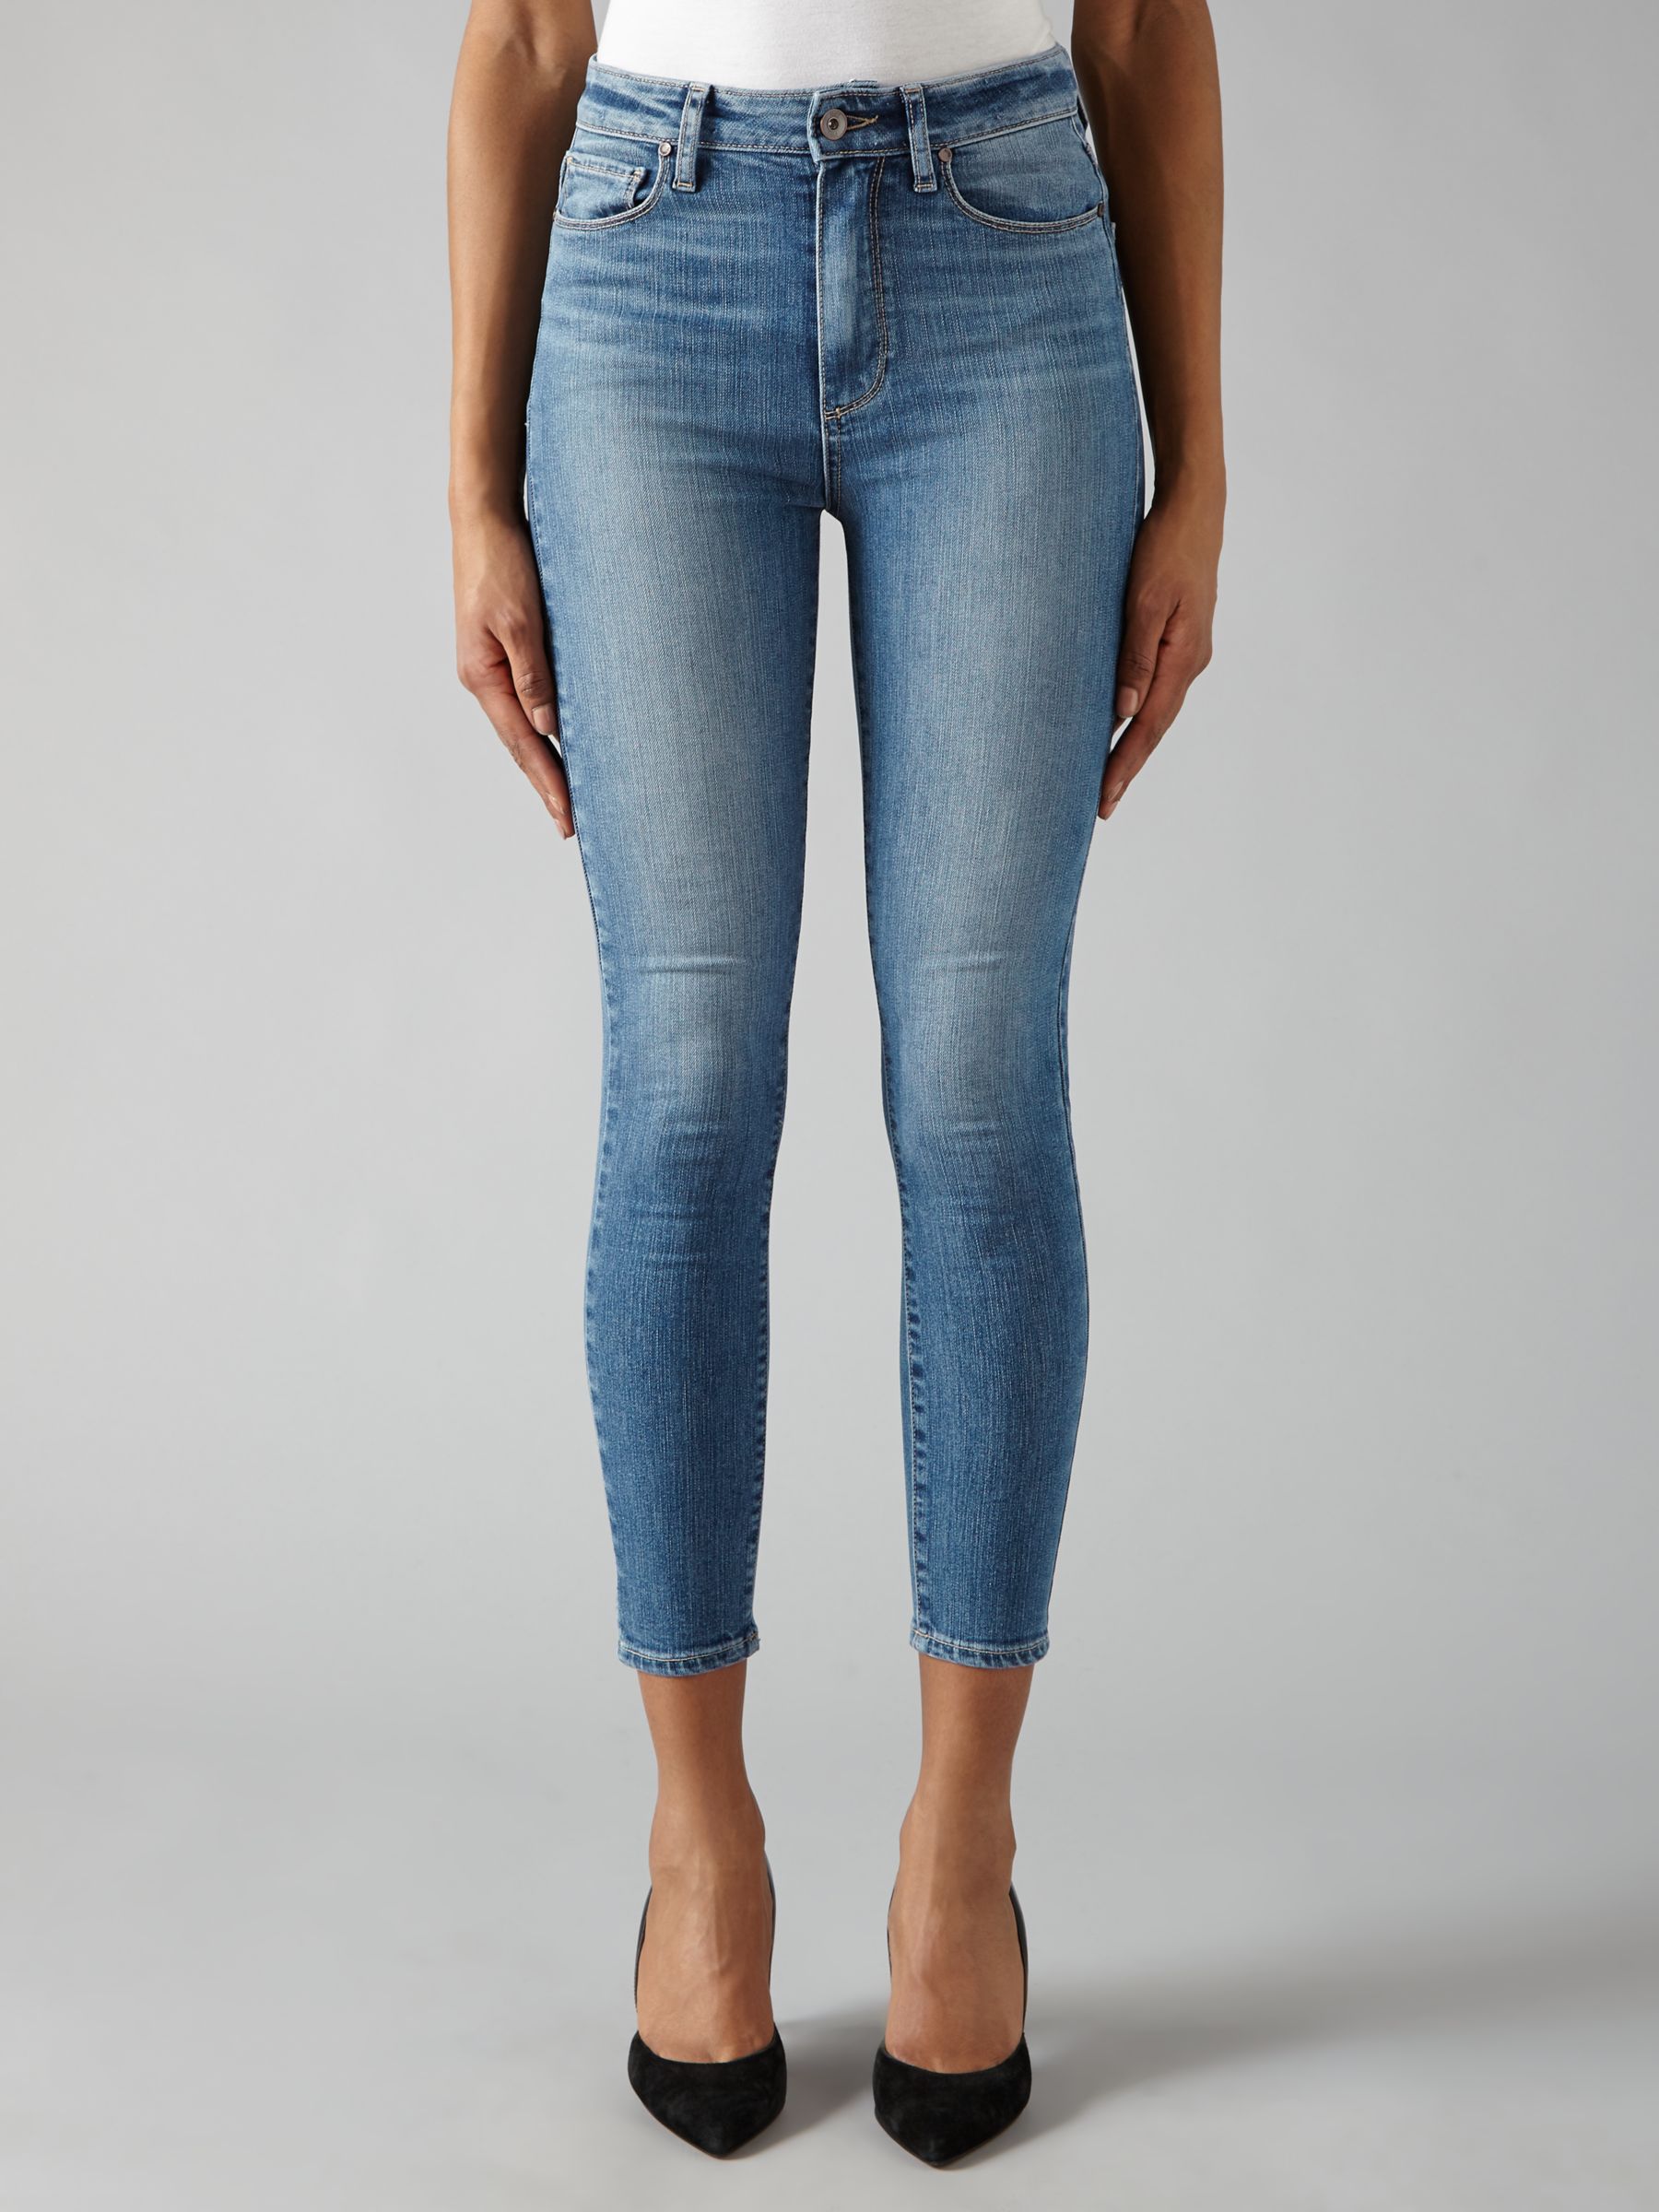 paige jeans for women